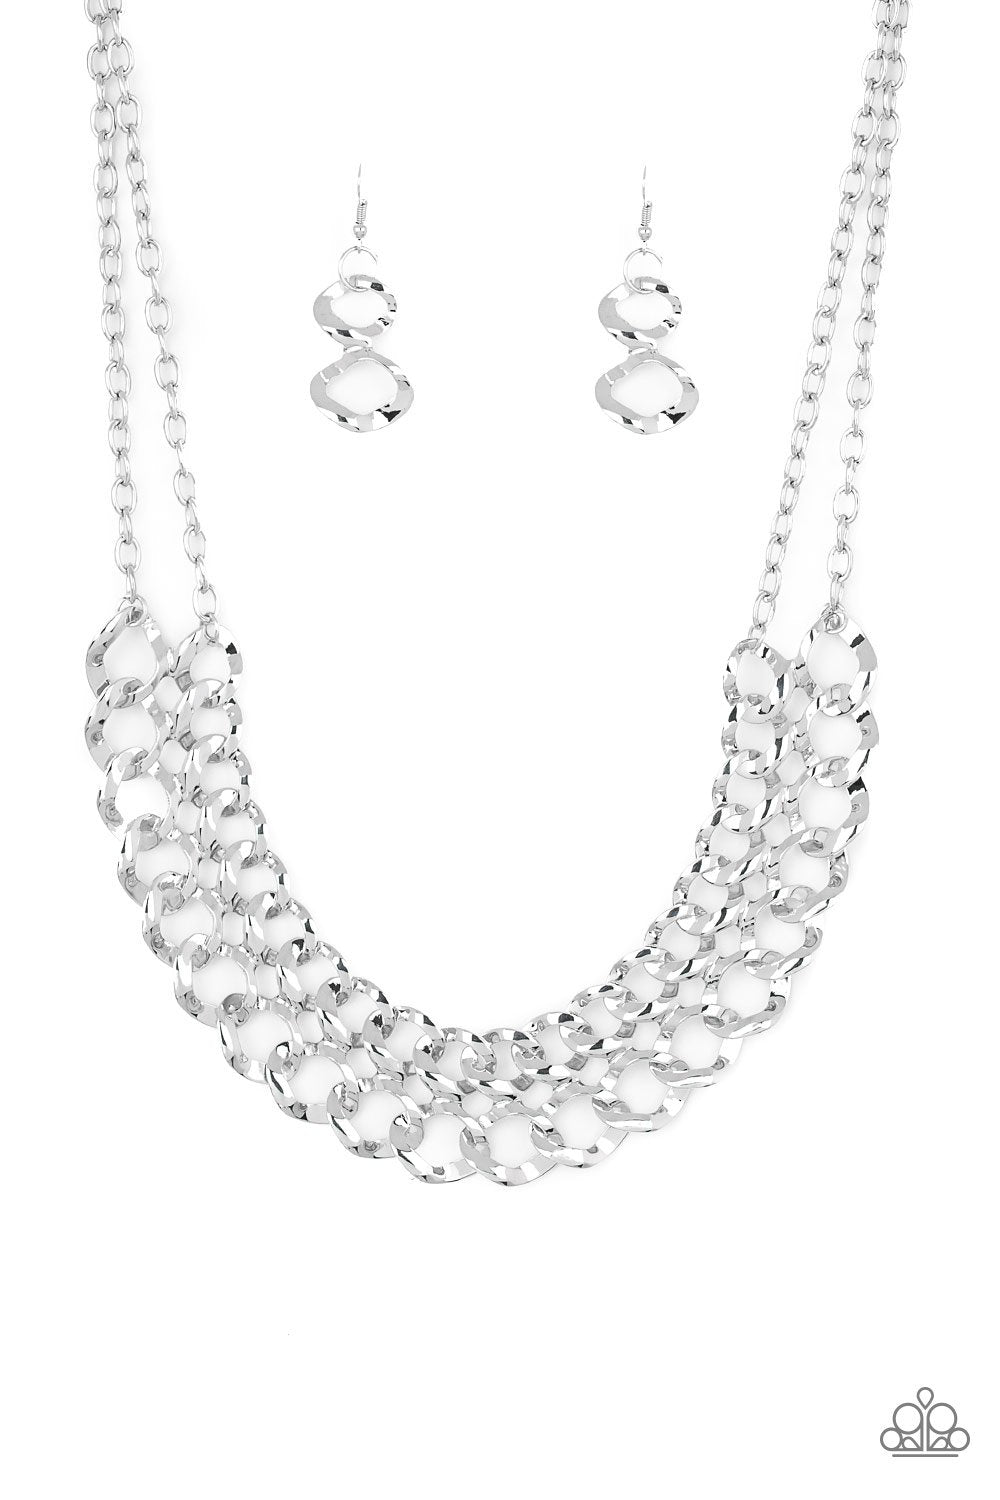 Street Meet and Greet Silver Double Chain Necklace - Paparazzi Accessories-CarasShop.com - $5 Jewelry by Cara Jewels